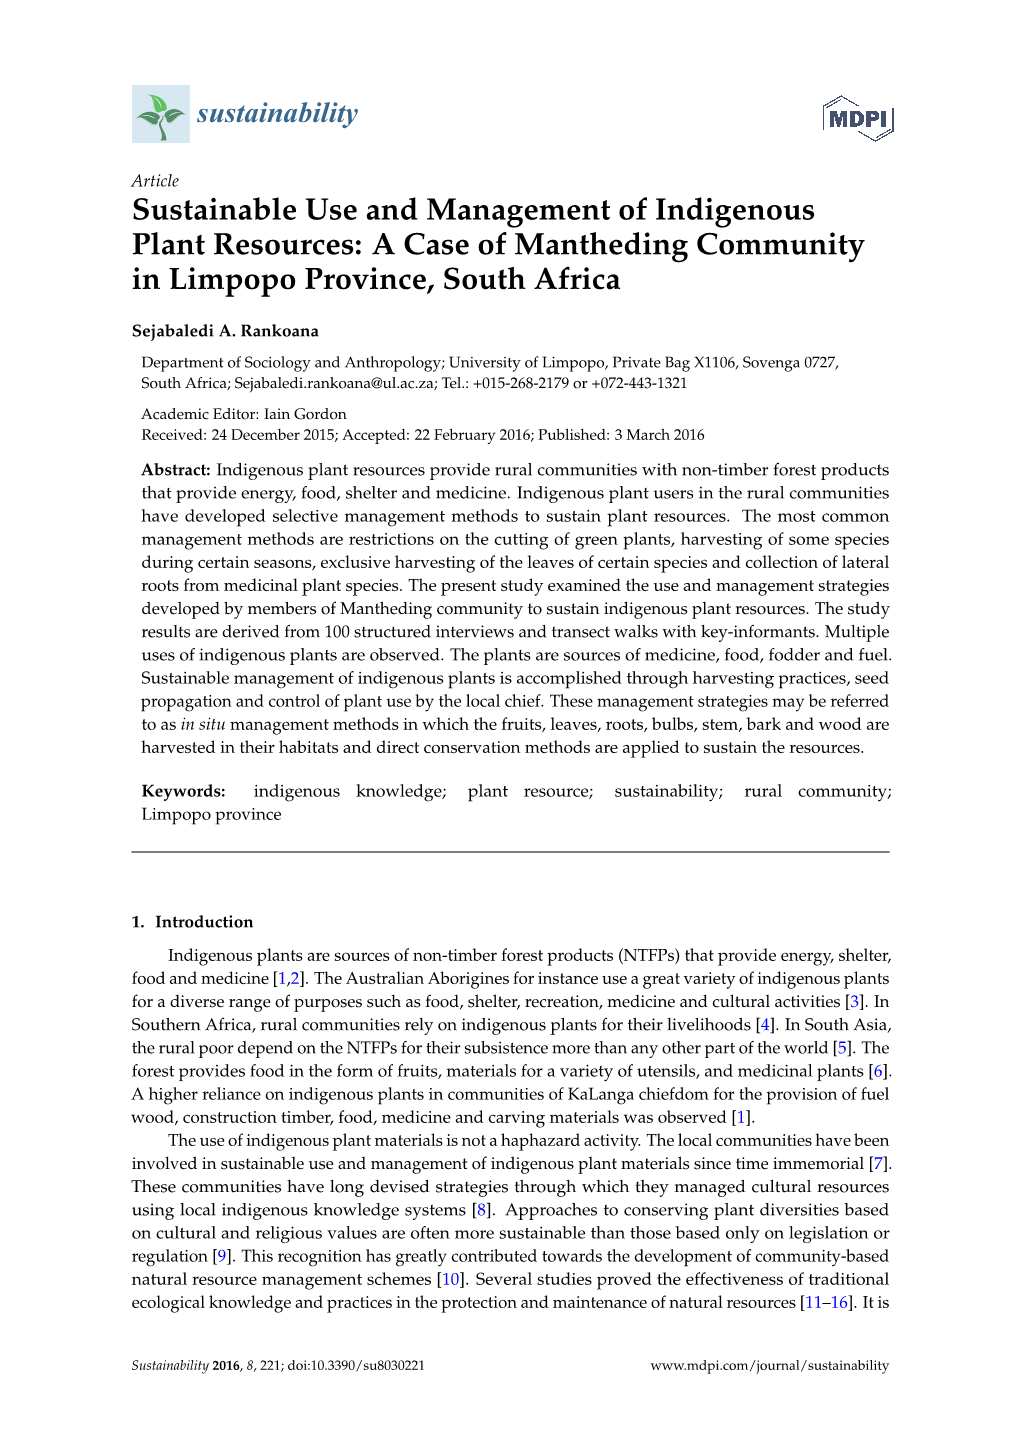 Sustainable Use and Management of Indigenous Plant Resources: a Case of Mantheding Community in Limpopo Province, South Africa